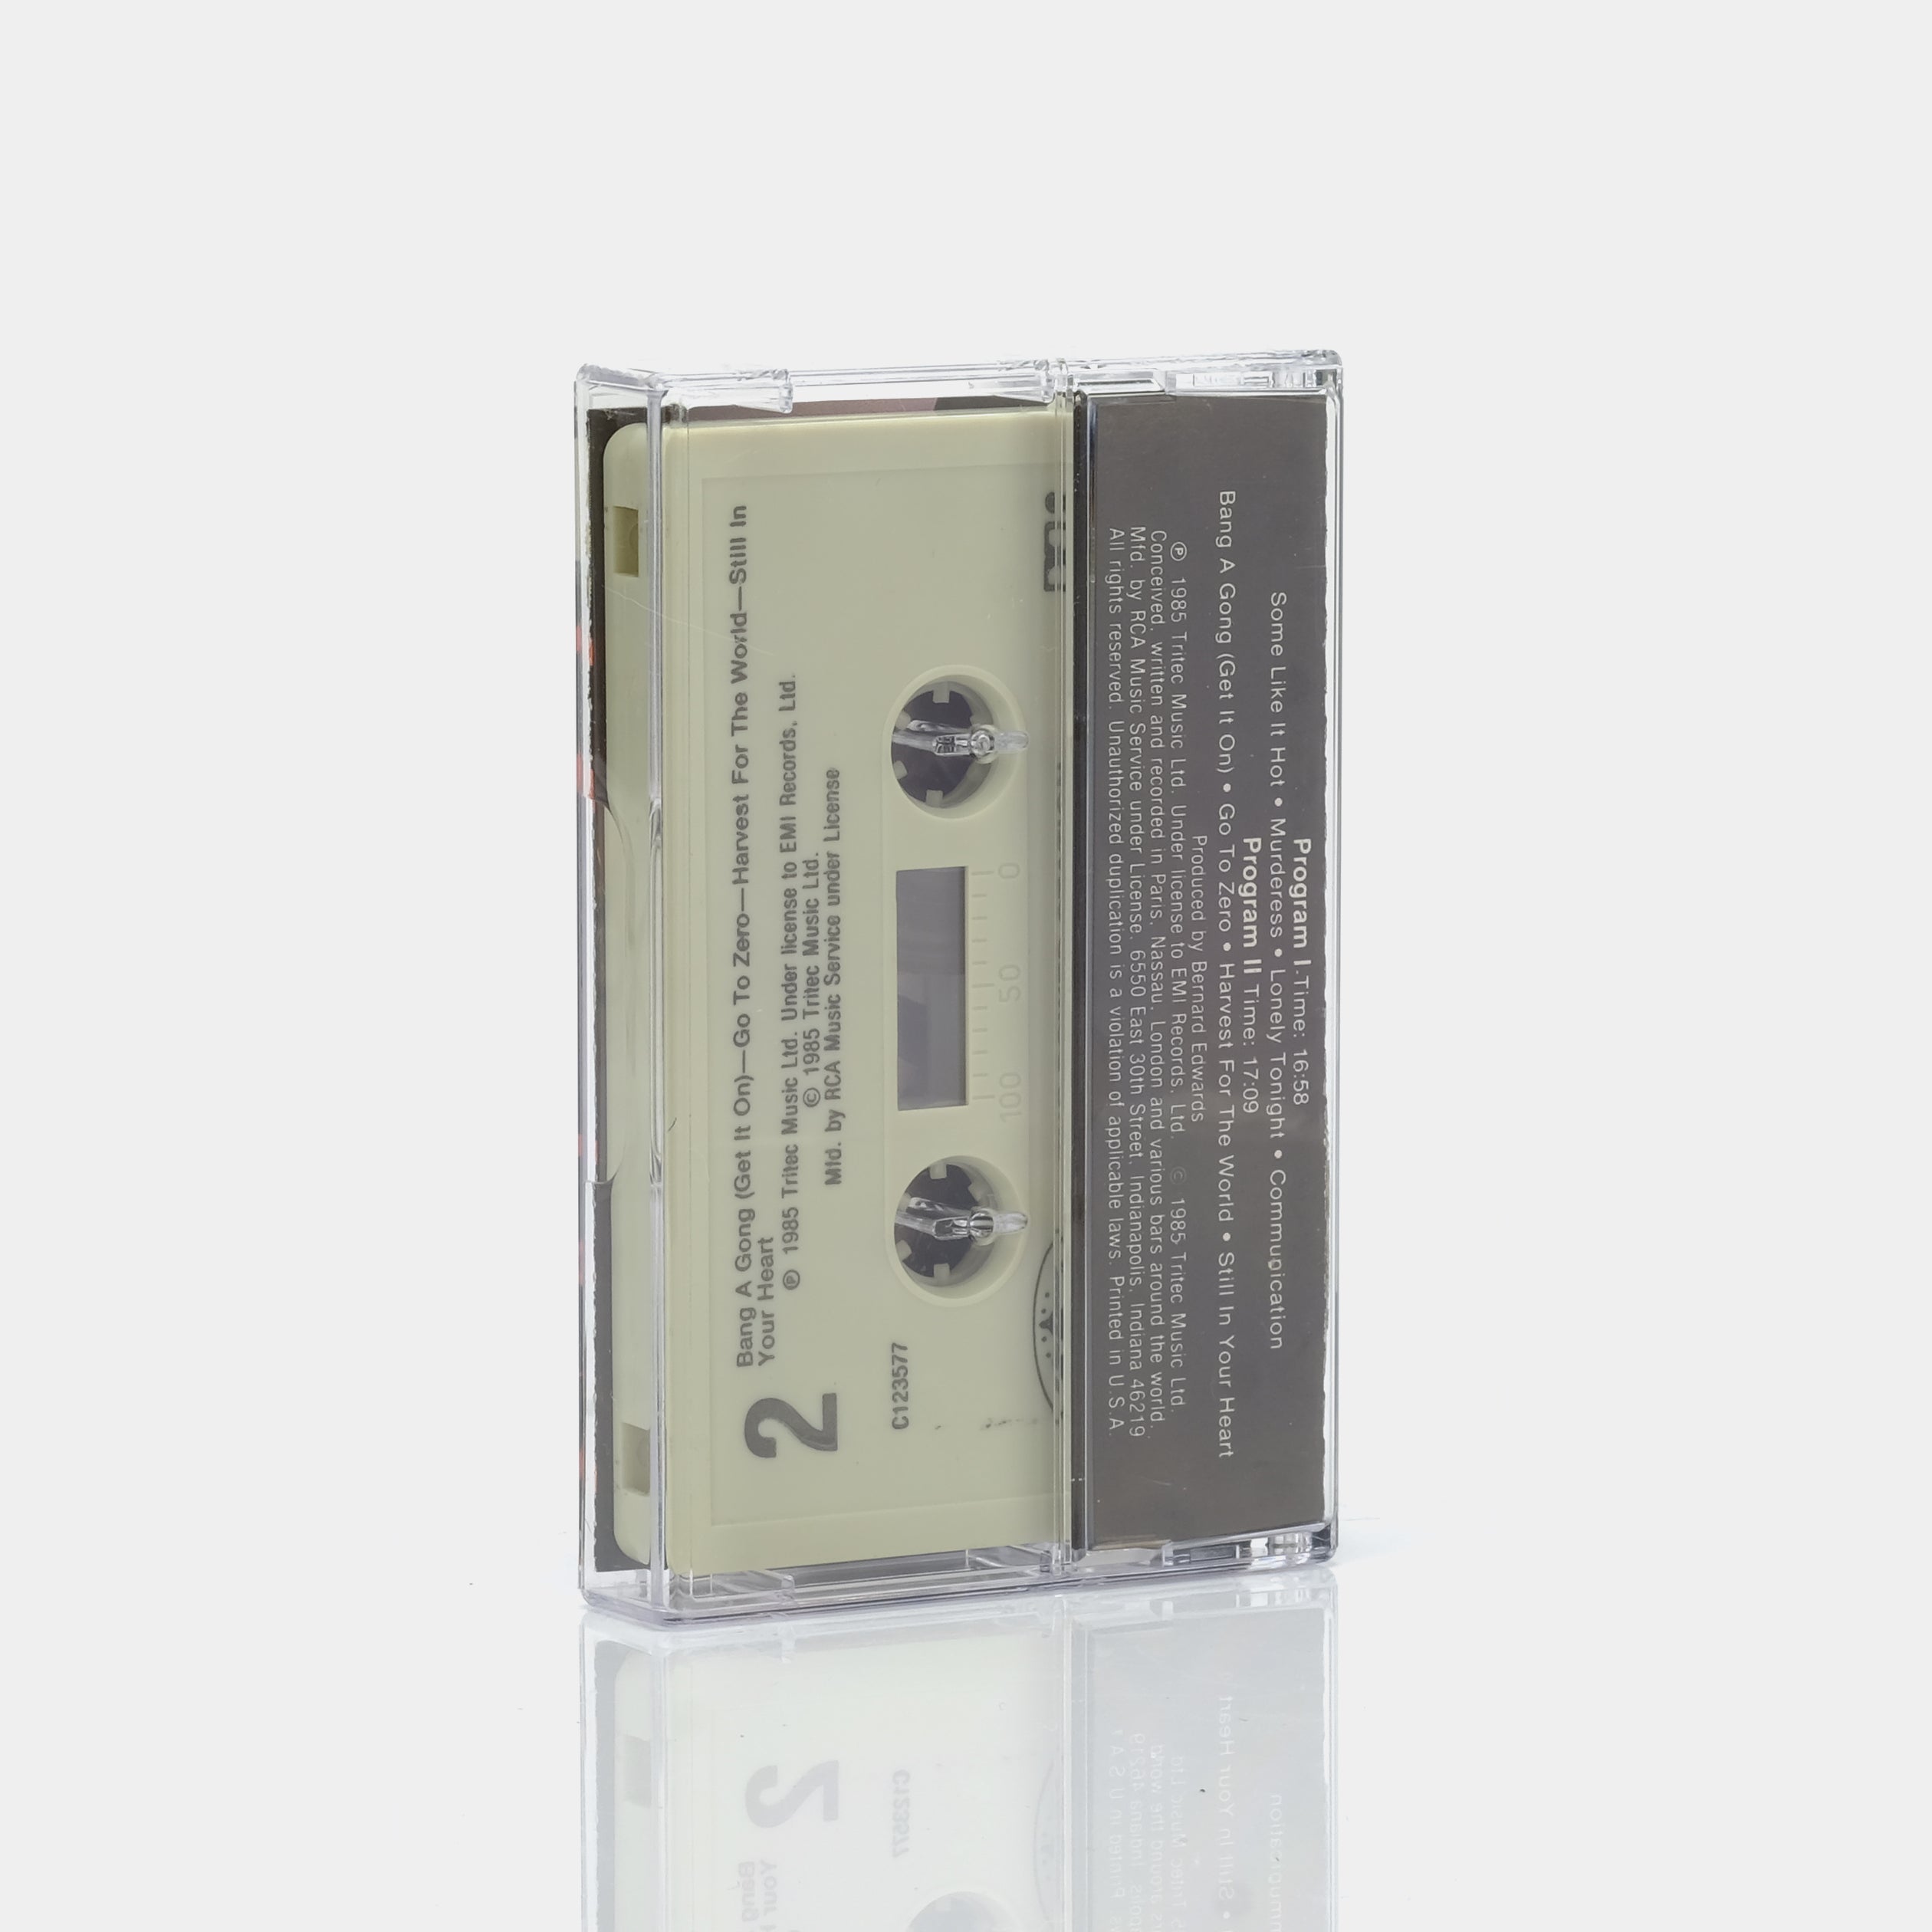 The Power Station - The Power Station Cassette Tape